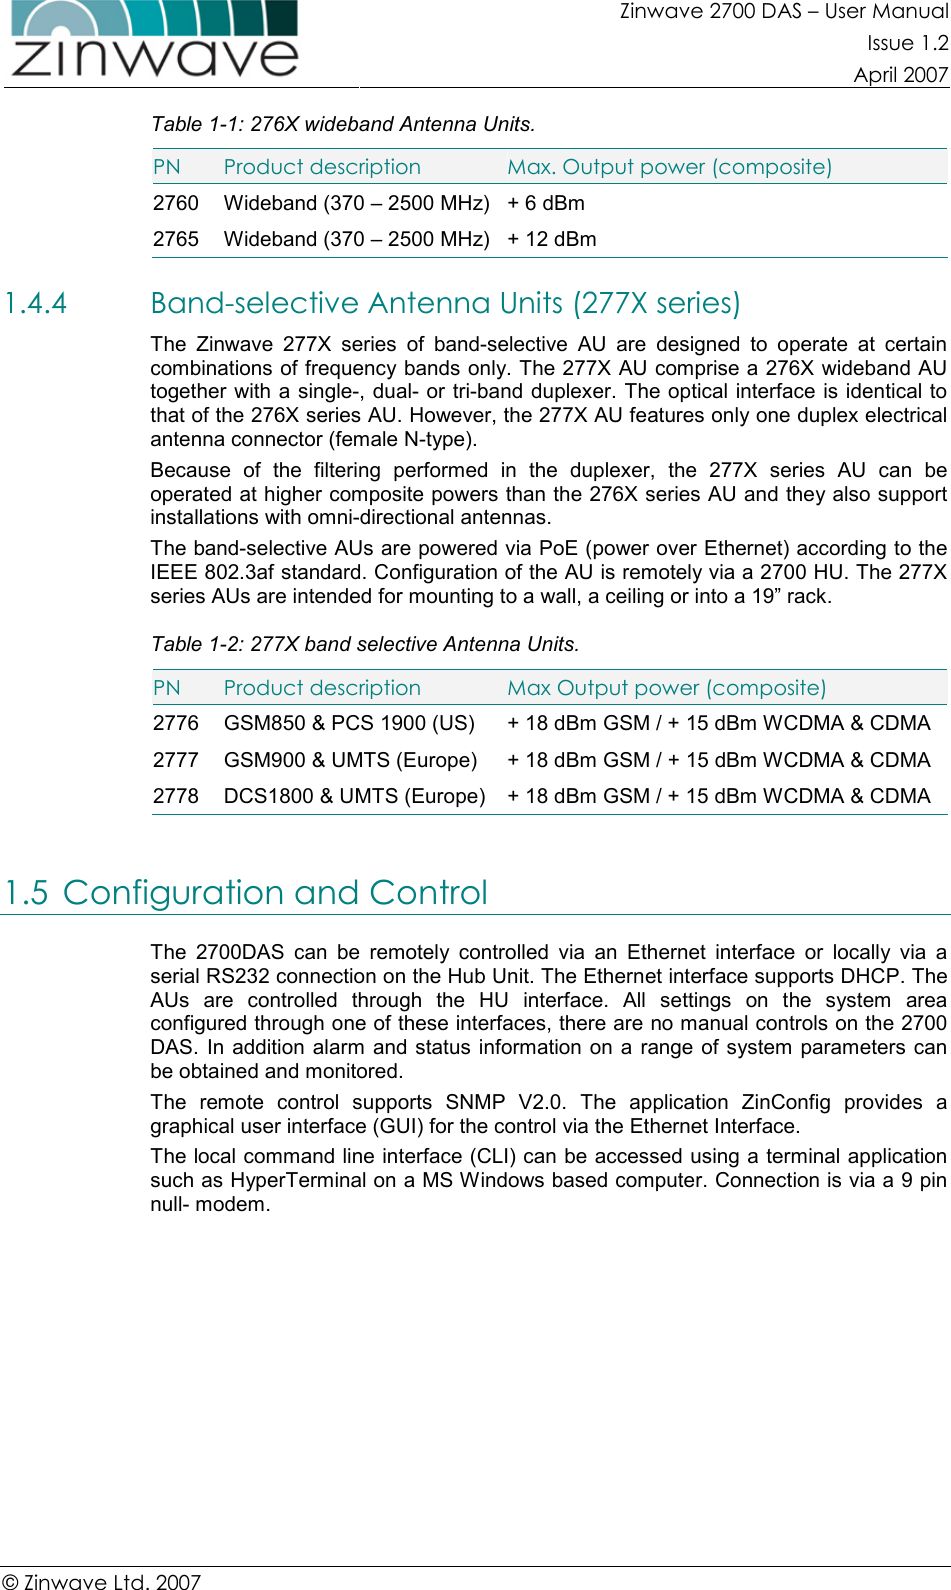 Zinwave 2700 DAS – User Manual Issue 1.2  April 2007  © Zinwave Ltd. 2007  Table 1-1: 276X wideband Antenna Units. PN  Product description  Max. Output power (composite) 2760  Wideband (370 – 2500 MHz)  + 6 dBm 2765  Wideband (370 – 2500 MHz)  + 12 dBm 1.4.4 Band-selective Antenna Units (277X series) The  Zinwave  277X  series  of  band-selective  AU  are  designed  to  operate  at  certain combinations of frequency bands only. The 277X AU comprise a 276X wideband AU together with a single-, dual- or tri-band duplexer. The optical interface is identical to that of the 276X series AU. However, the 277X AU features only one duplex electrical antenna connector (female N-type). Because  of  the  filtering  performed  in  the  duplexer,  the  277X  series  AU  can  be operated at higher composite powers than the 276X series AU and they also support installations with omni-directional antennas. The band-selective AUs are powered via PoE (power over Ethernet) according to the IEEE 802.3af standard. Configuration of the AU is remotely via a 2700 HU. The 277X series AUs are intended for mounting to a wall, a ceiling or into a 19” rack. Table 1-2: 277X band selective Antenna Units. PN  Product description  Max Output power (composite) 2776  GSM850 &amp; PCS 1900 (US)  + 18 dBm GSM / + 15 dBm WCDMA &amp; CDMA 2777  GSM900 &amp; UMTS (Europe)  + 18 dBm GSM / + 15 dBm WCDMA &amp; CDMA 2778  DCS1800 &amp; UMTS (Europe)  + 18 dBm GSM / + 15 dBm WCDMA &amp; CDMA  1.5 Configuration and Control The  2700DAS  can  be  remotely  controlled  via  an  Ethernet  interface  or  locally  via  a serial RS232 connection on the Hub Unit. The Ethernet interface supports DHCP. The AUs  are  controlled  through  the  HU  interface.  All  settings  on  the  system  area configured through one of these interfaces, there are no manual controls on the 2700 DAS. In addition  alarm and status information on a range of  system parameters can be obtained and monitored. The  remote  control  supports  SNMP  V2.0.  The  application  ZinConfig  provides  a graphical user interface (GUI) for the control via the Ethernet Interface. The local command line interface (CLI) can be accessed using a terminal application such as HyperTerminal on a MS Windows based computer. Connection is via a 9 pin null- modem. 